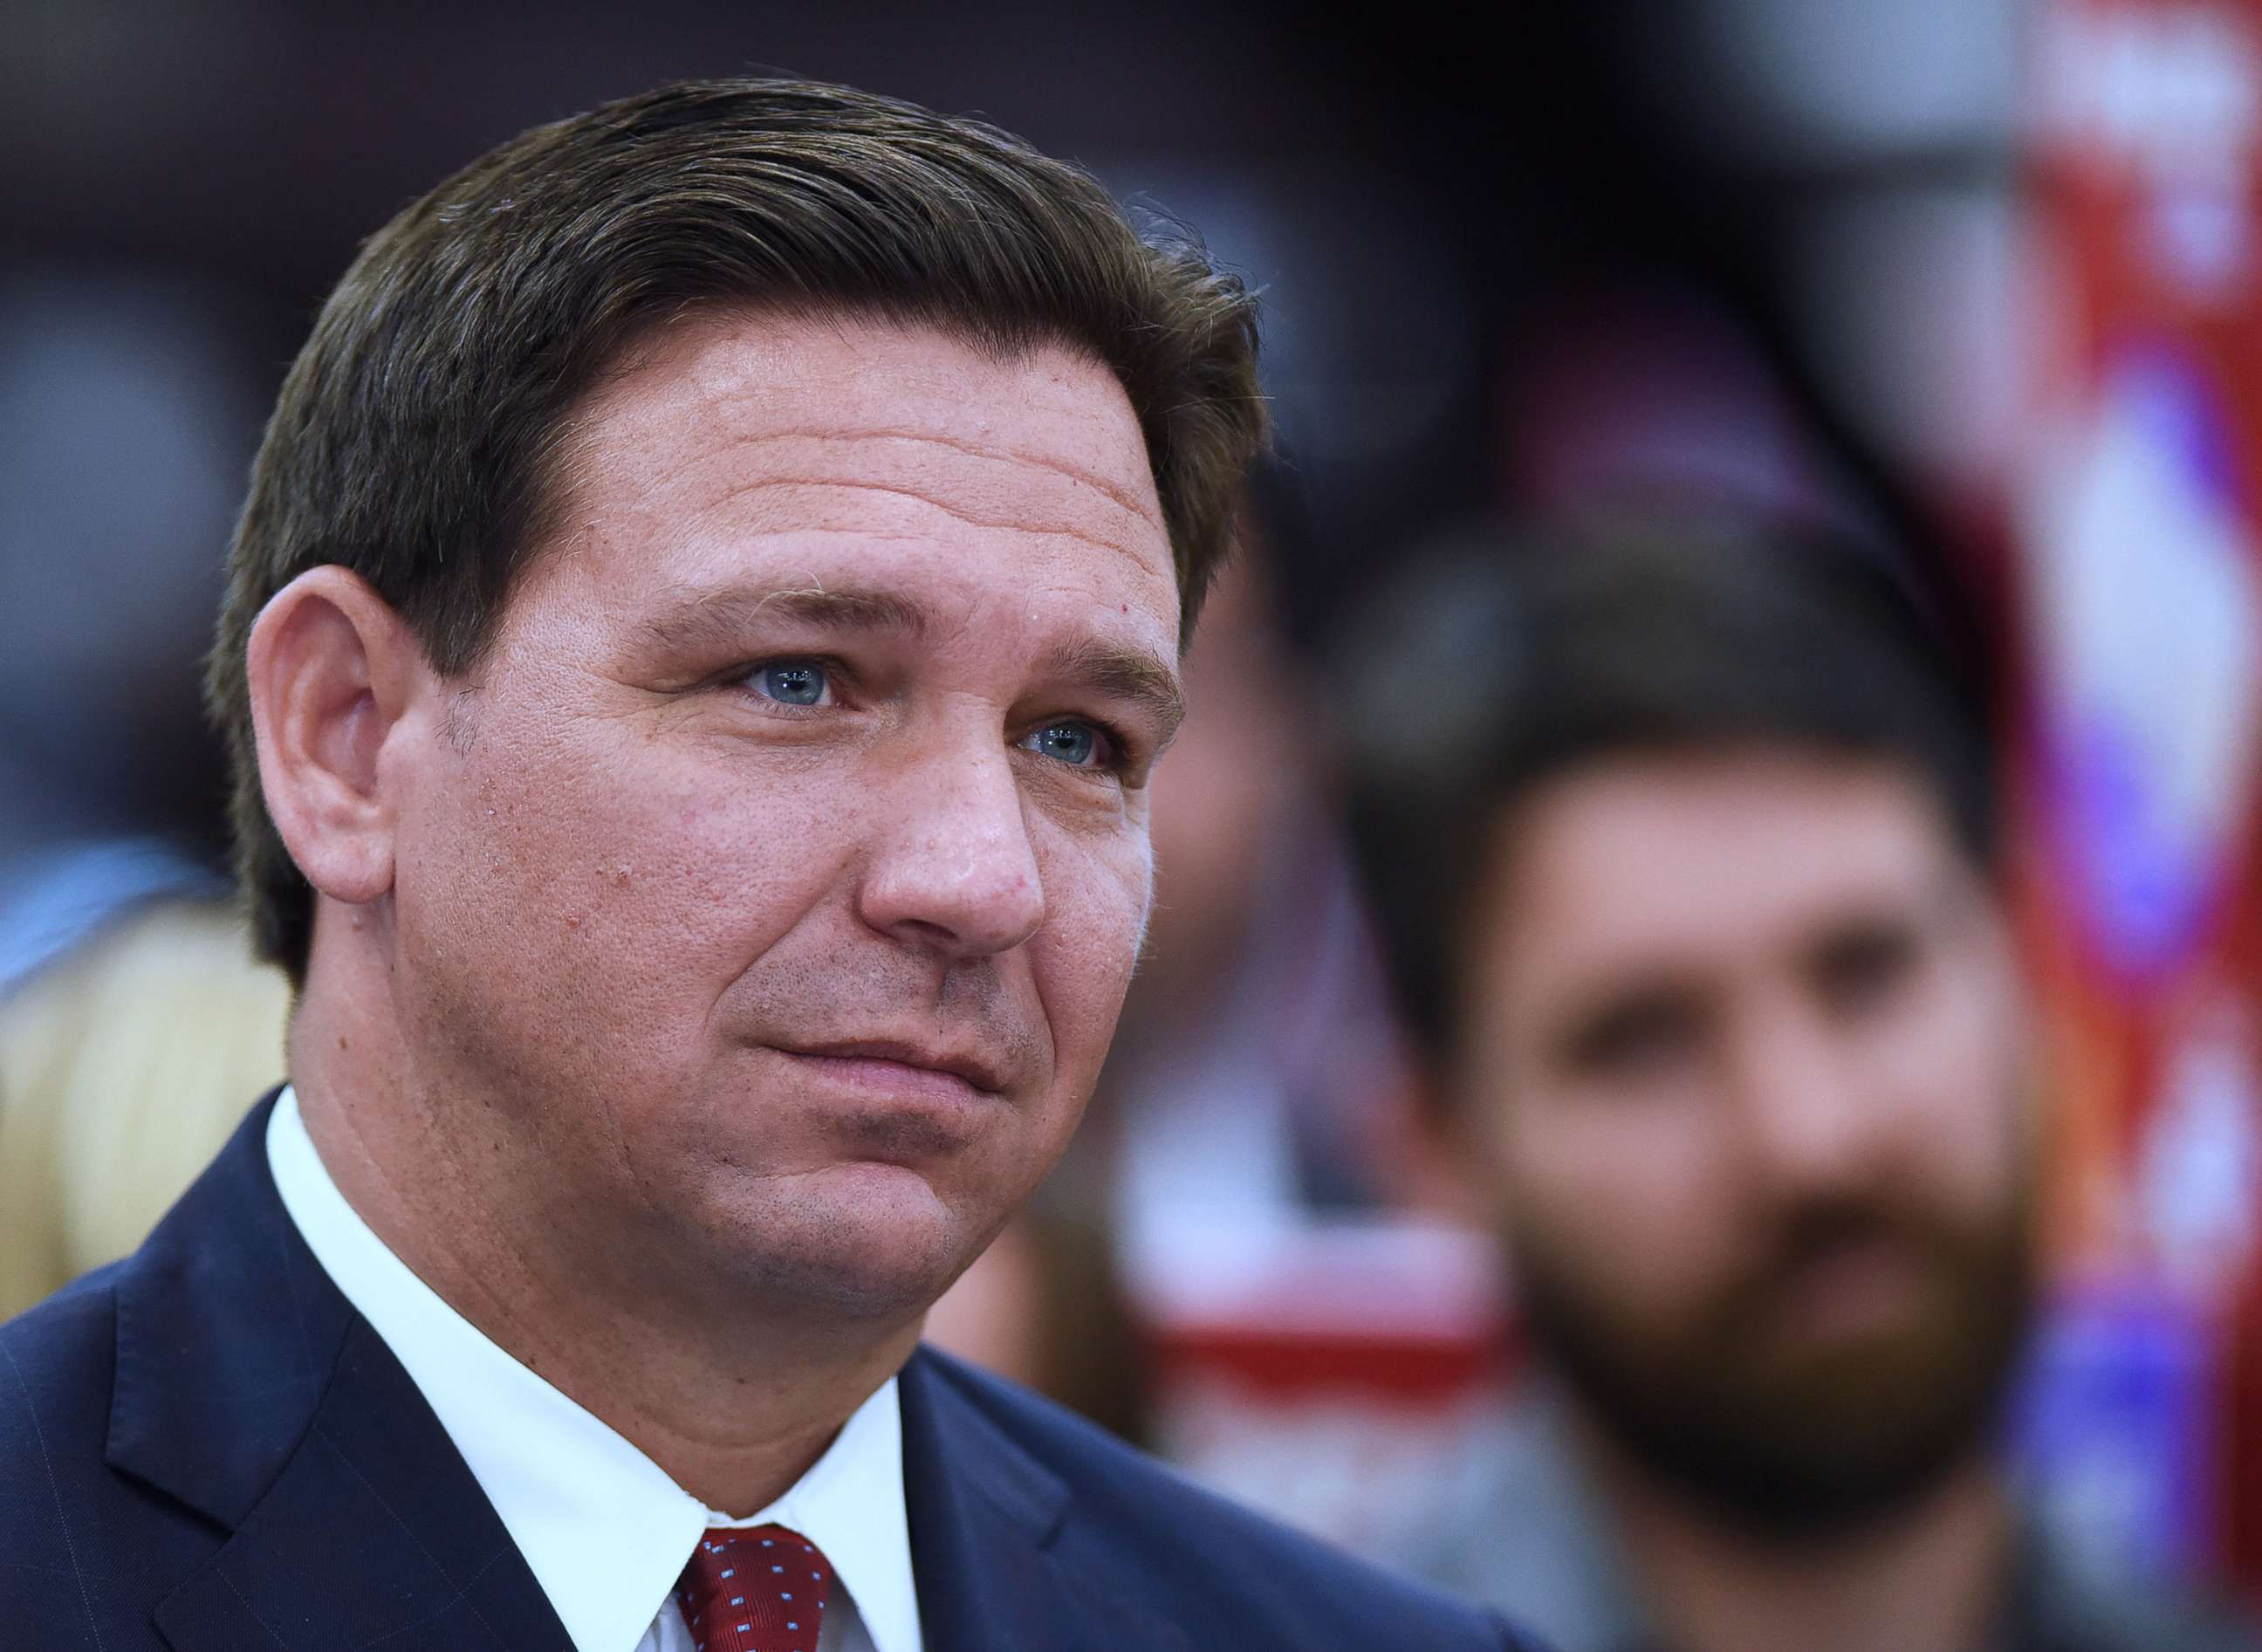 PHOTO: Florida Governor Ron DeSantis attends a press conference in Ocala, Fla., May 6, 2022.